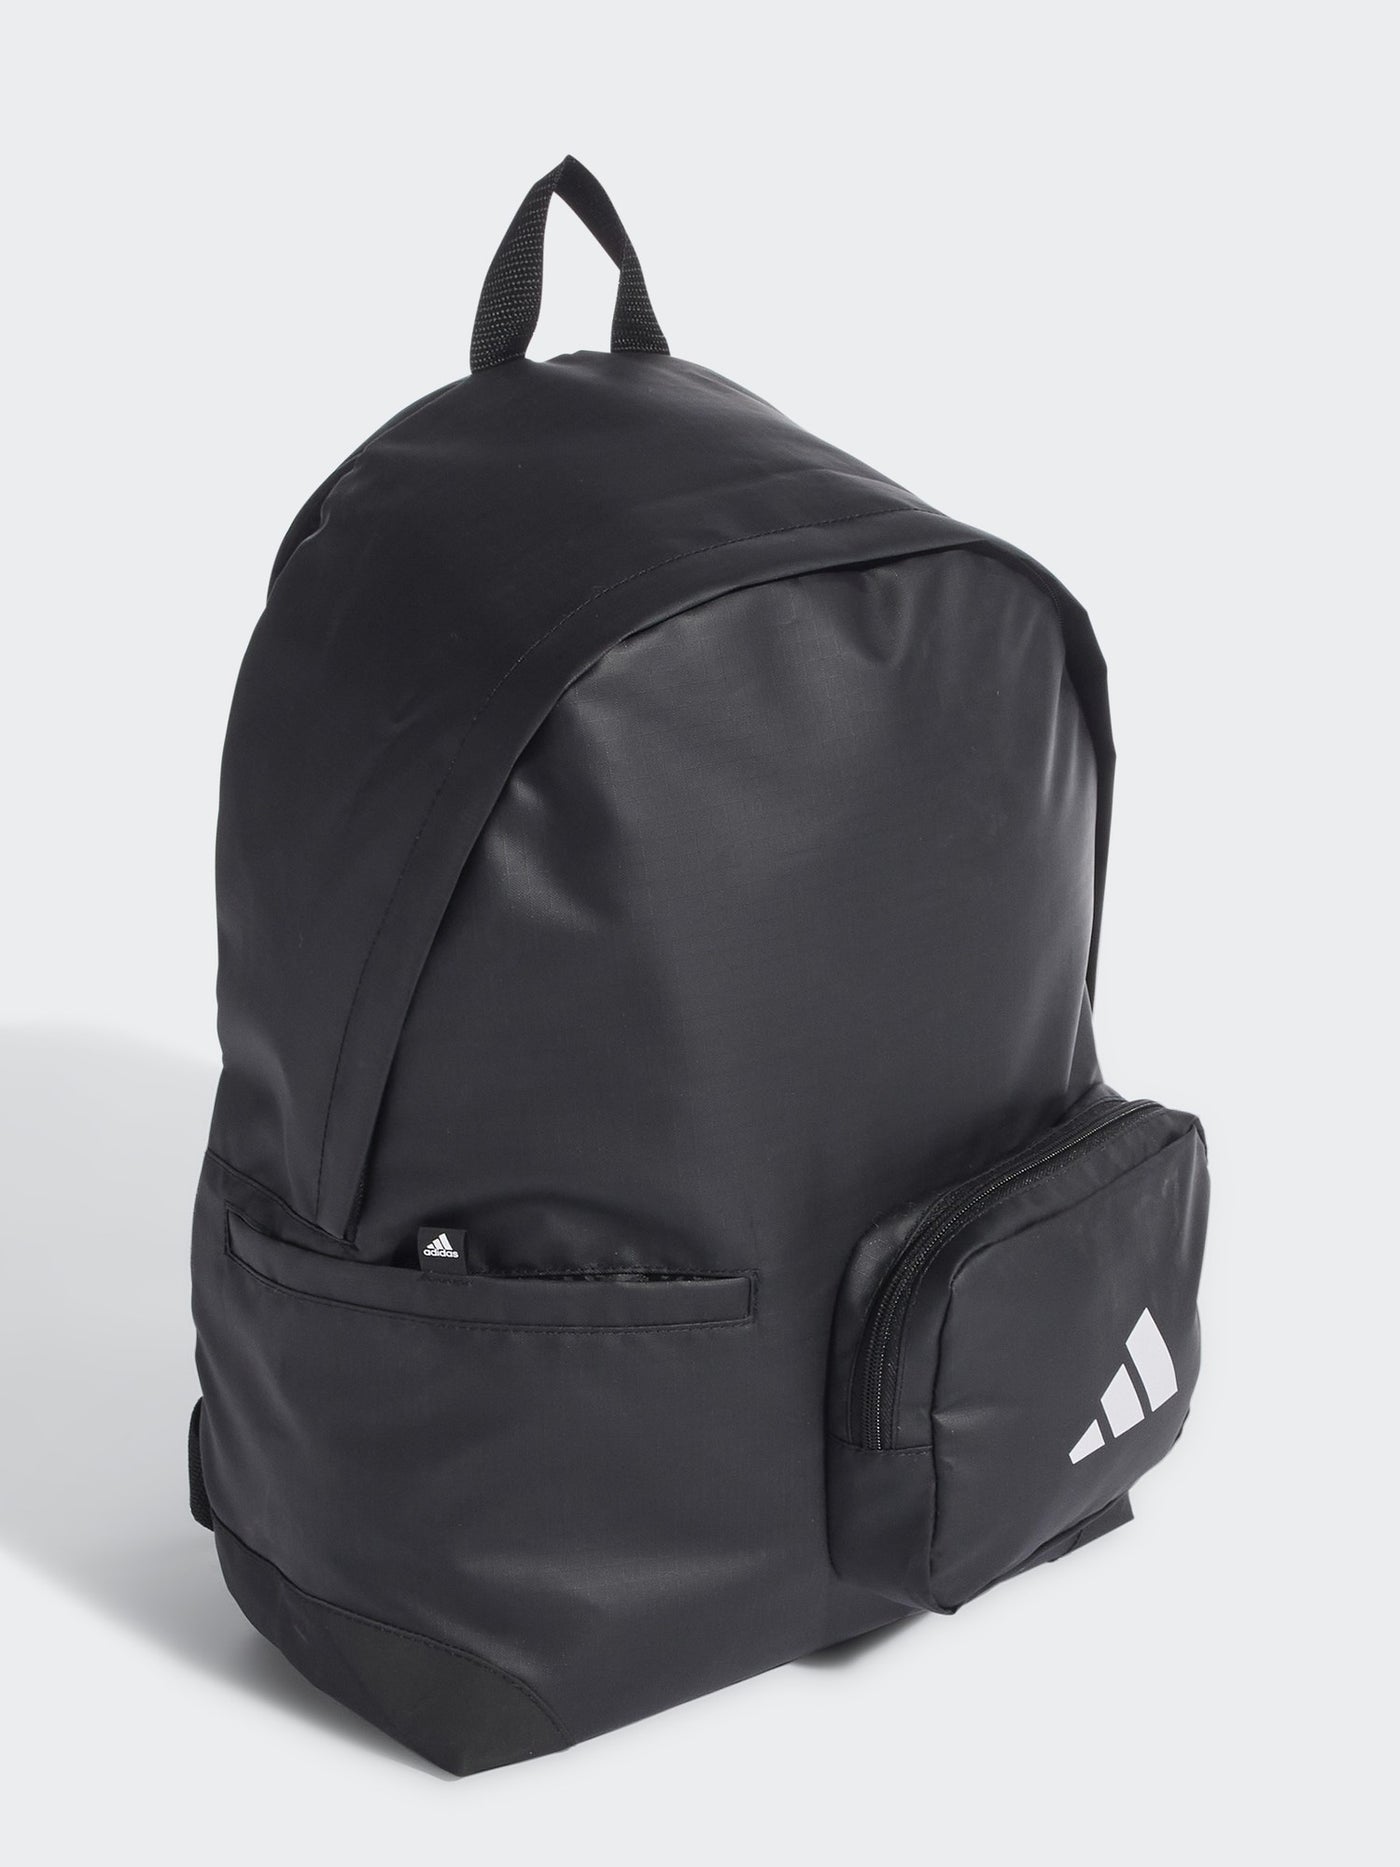 Future Icon 2 Backpack